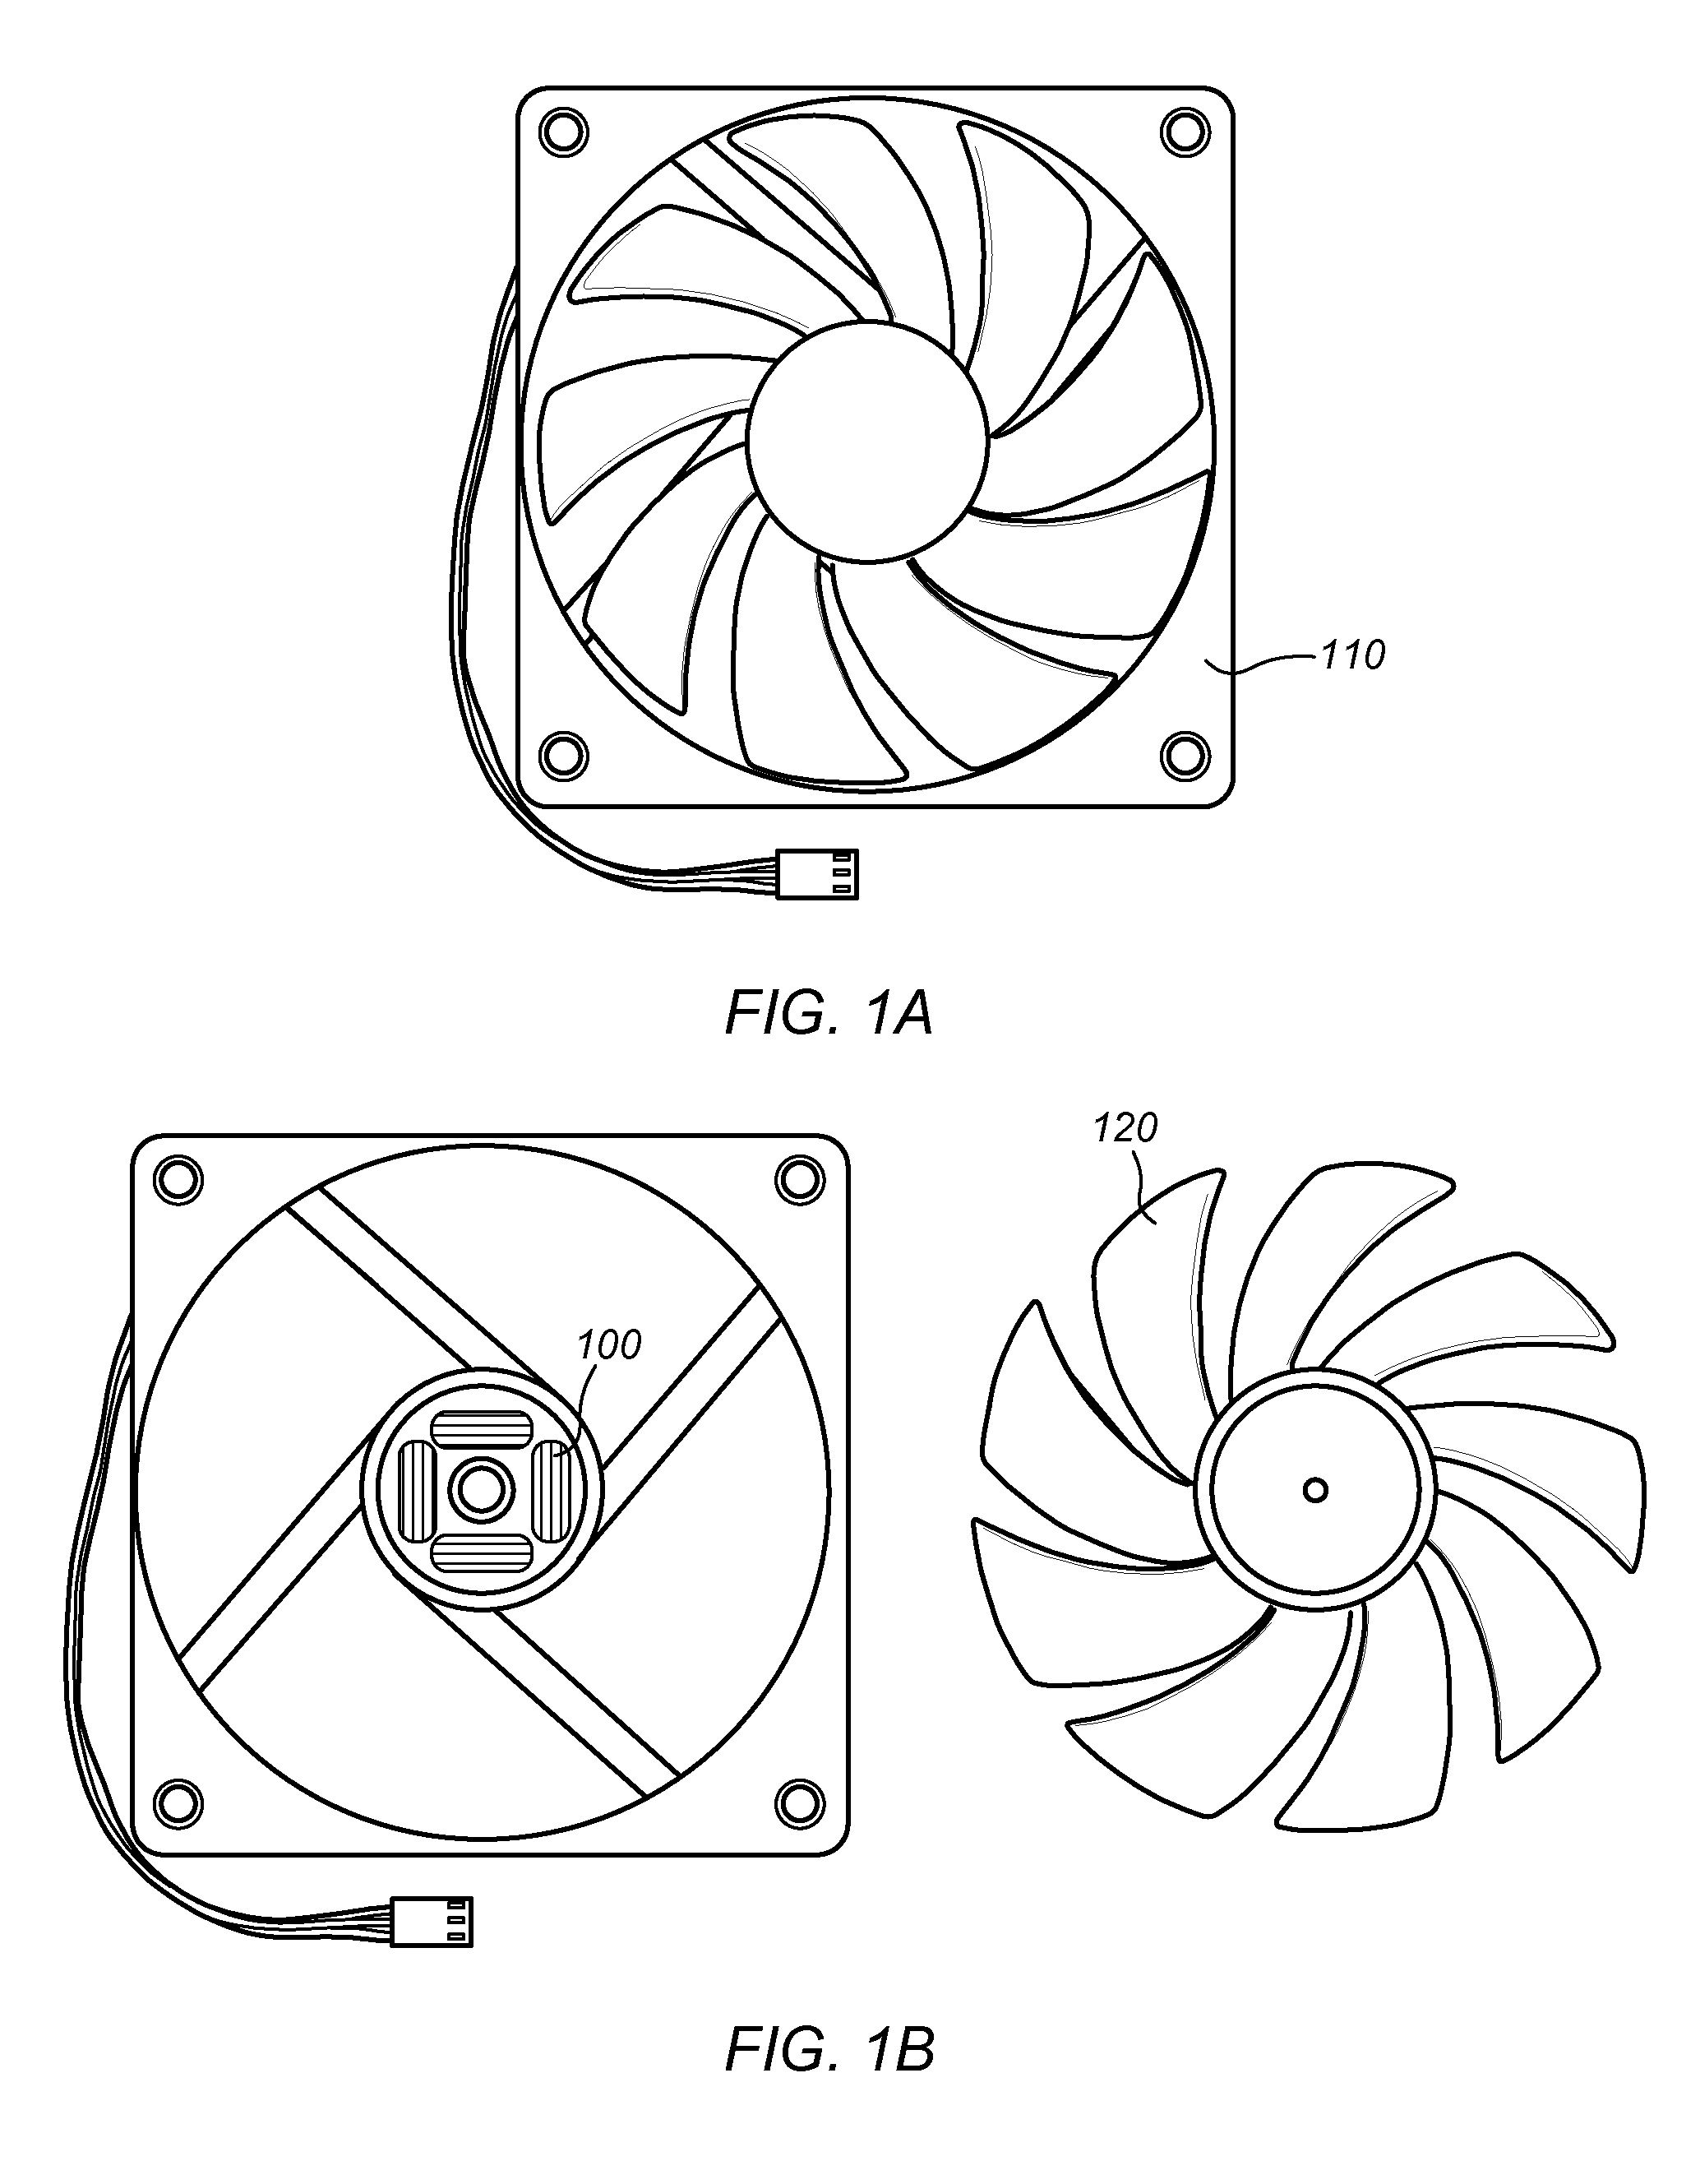 Method for Aligning and Starting a BLDC Three Phase Motor